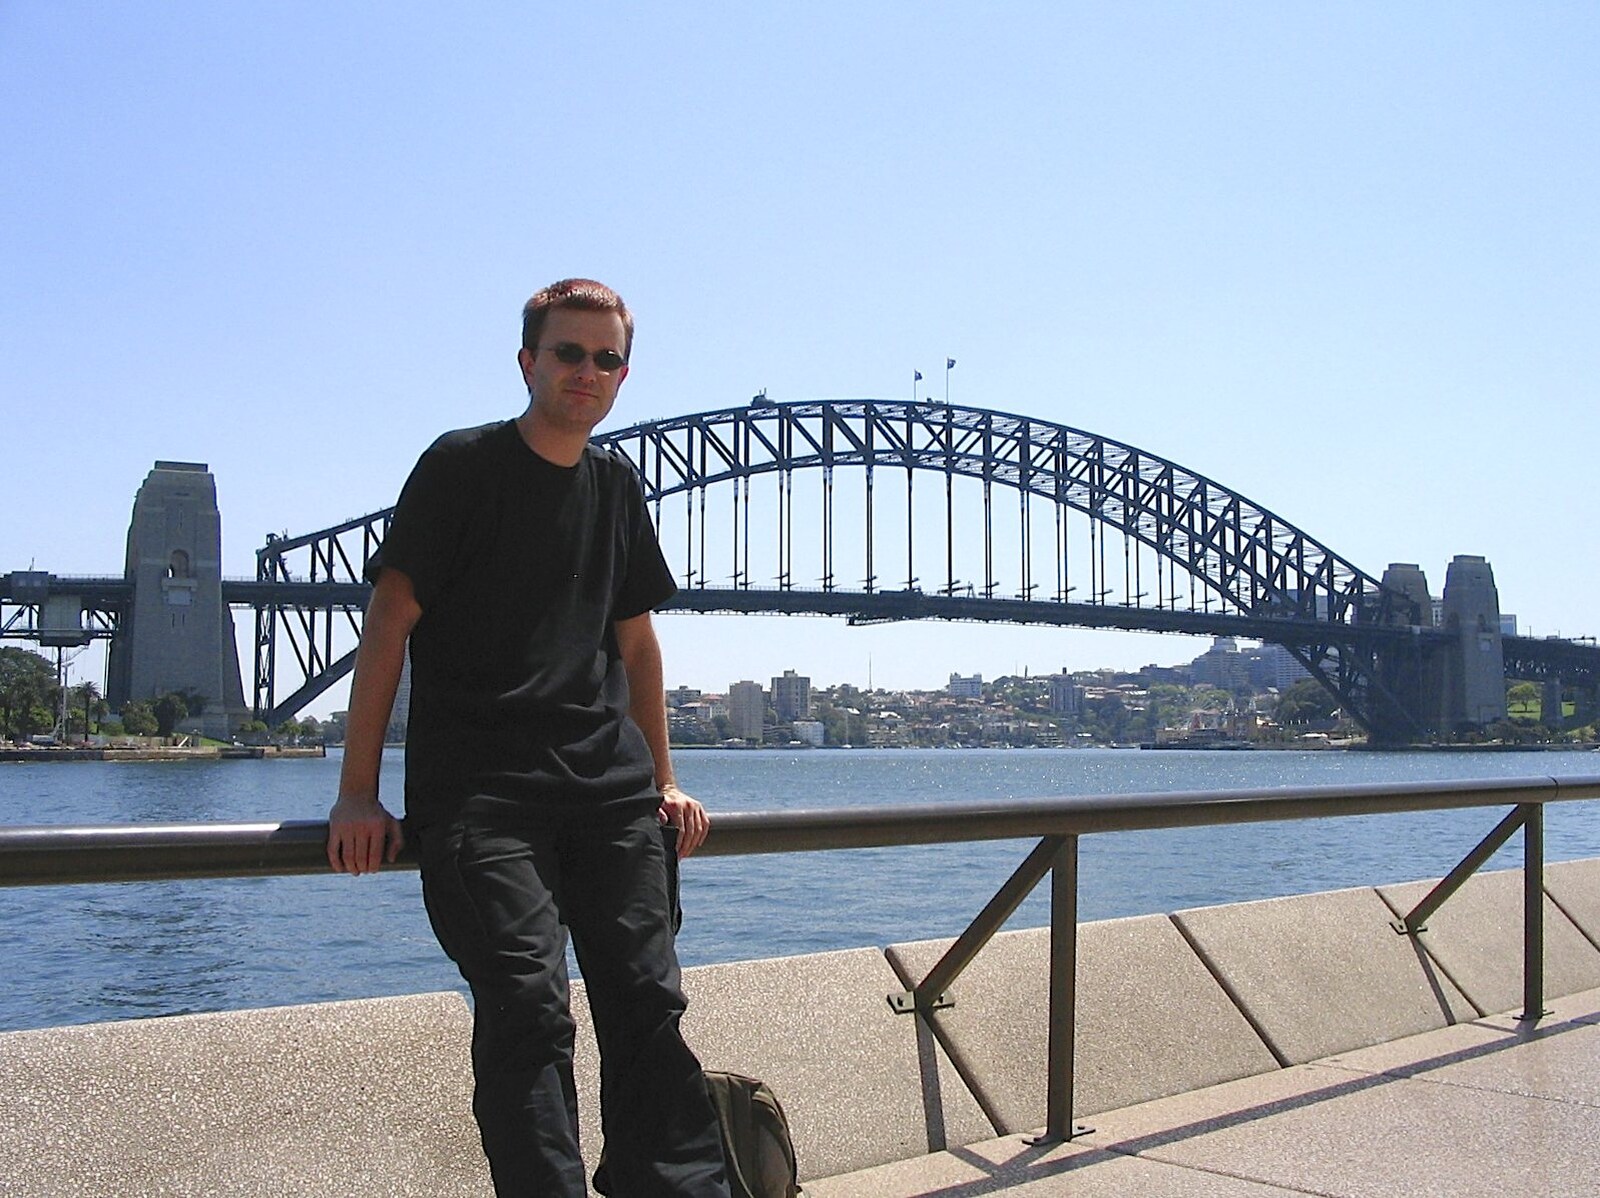 A selfie in front of the bridge from Sydney, New South Wales, Australia - 10th October 2004